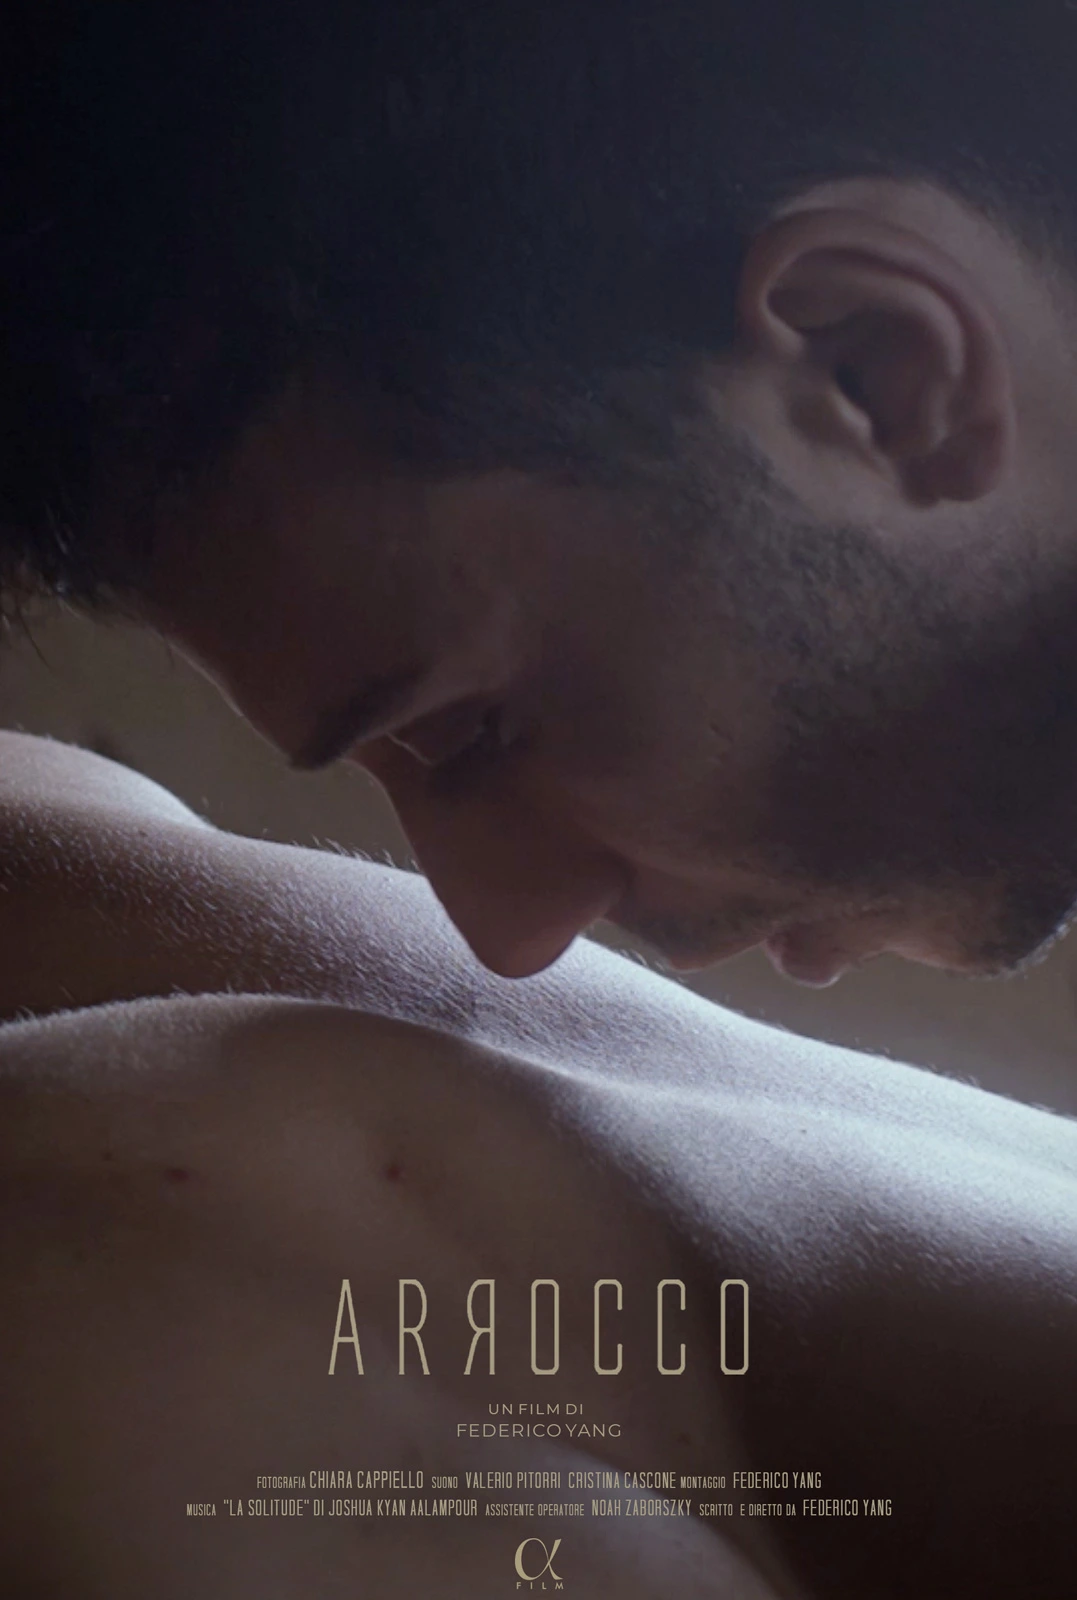 Poster of the short film "Arrocco" by Federico Yang